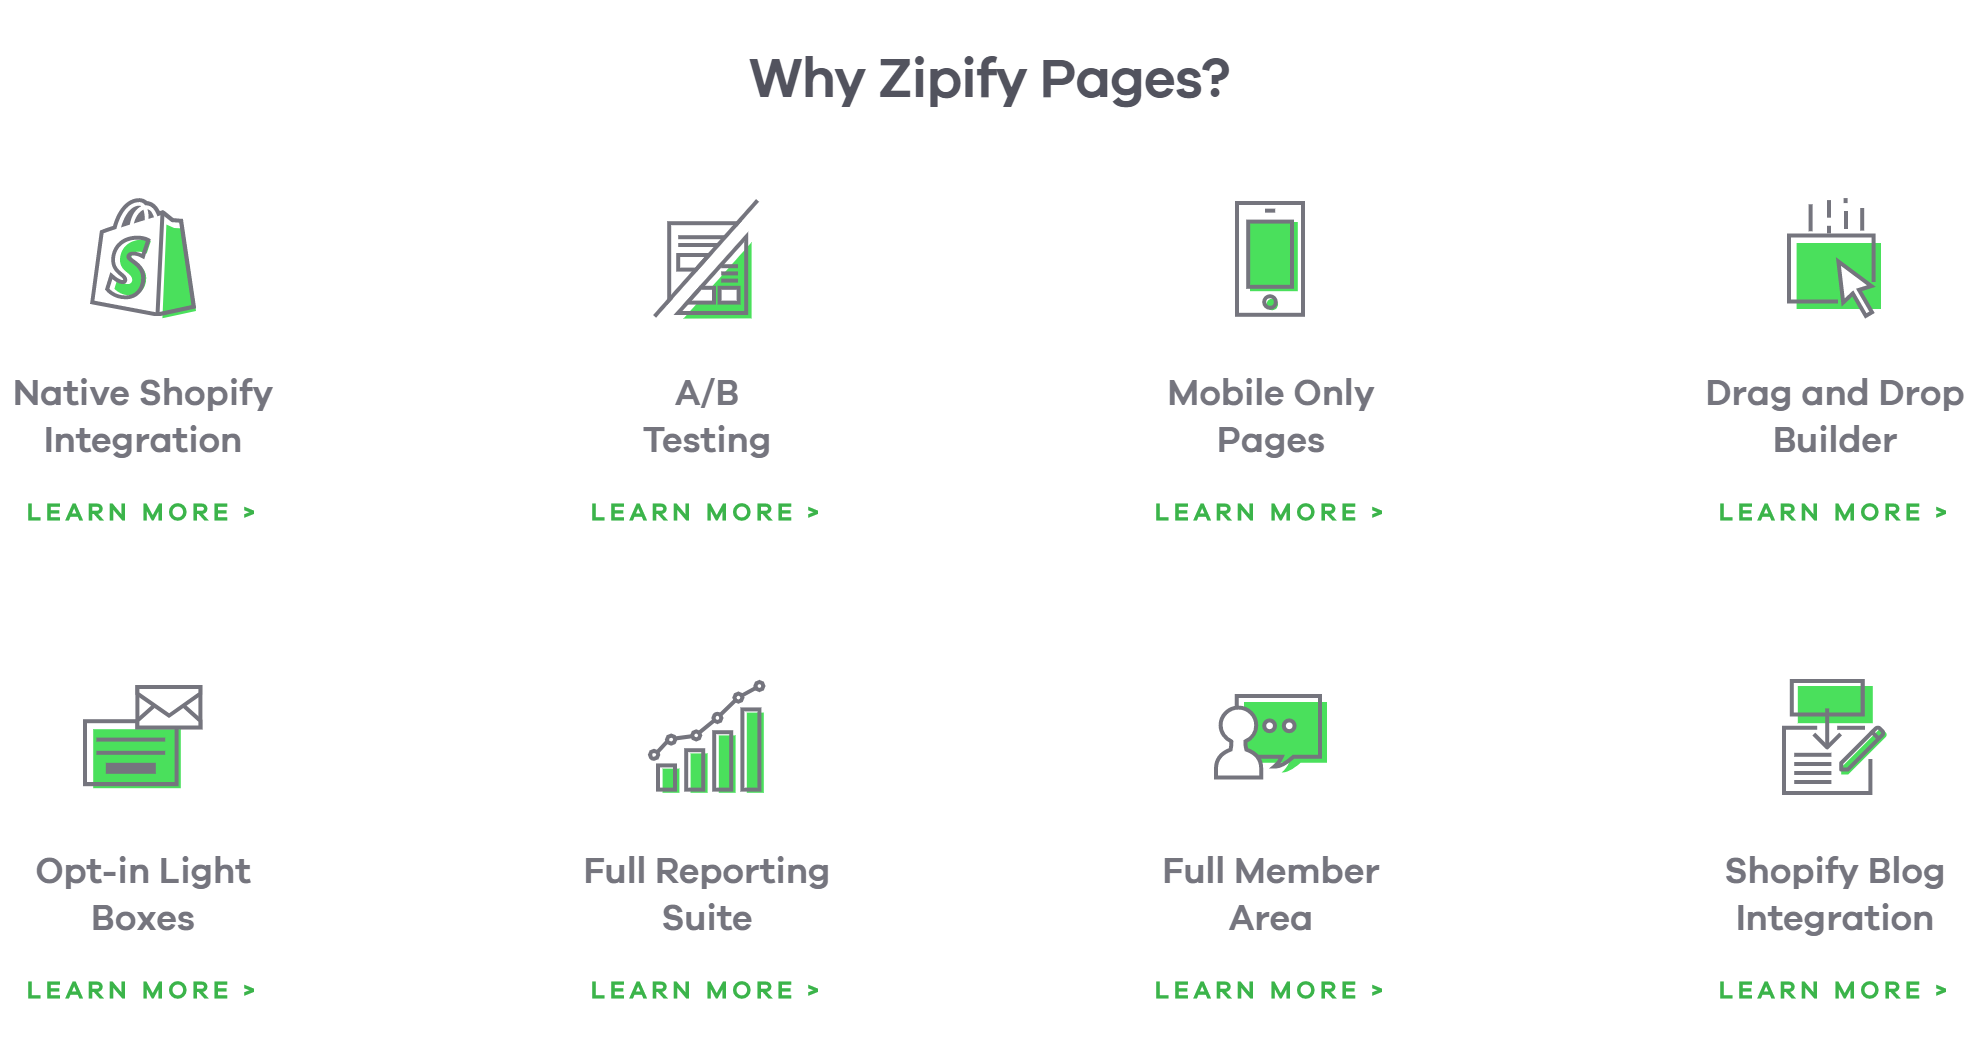 Zipify Pages